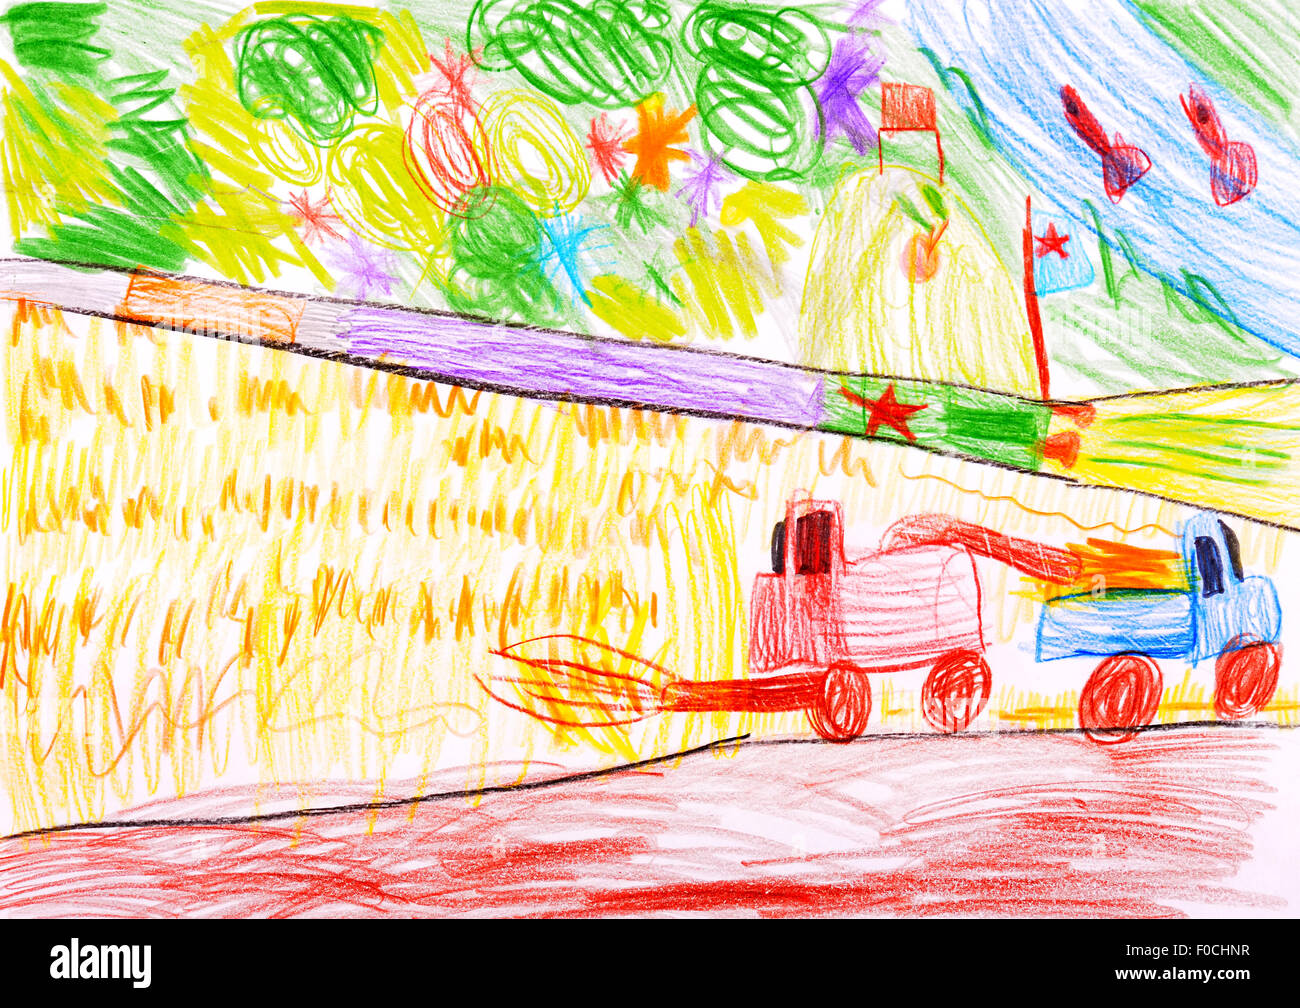 child's drawing. Combine harvesting a wheat and space rocket. Stock Photo